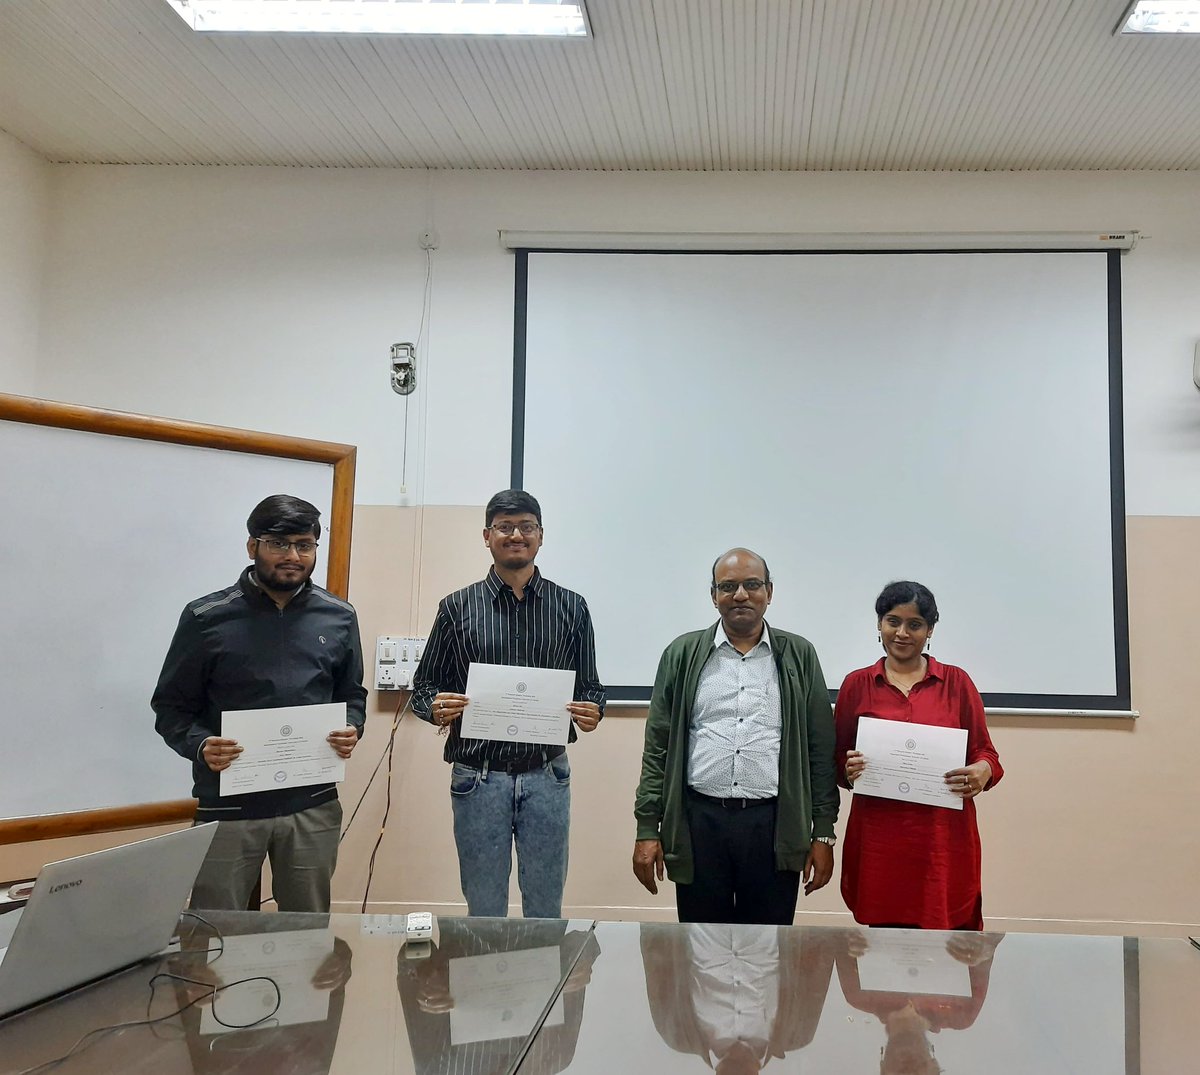 The Valedictory lecture was delivered by Dr. Prasenjit Banerjee (XLRI and University of Manchester) and chaired by @rit_ban (IIM B).